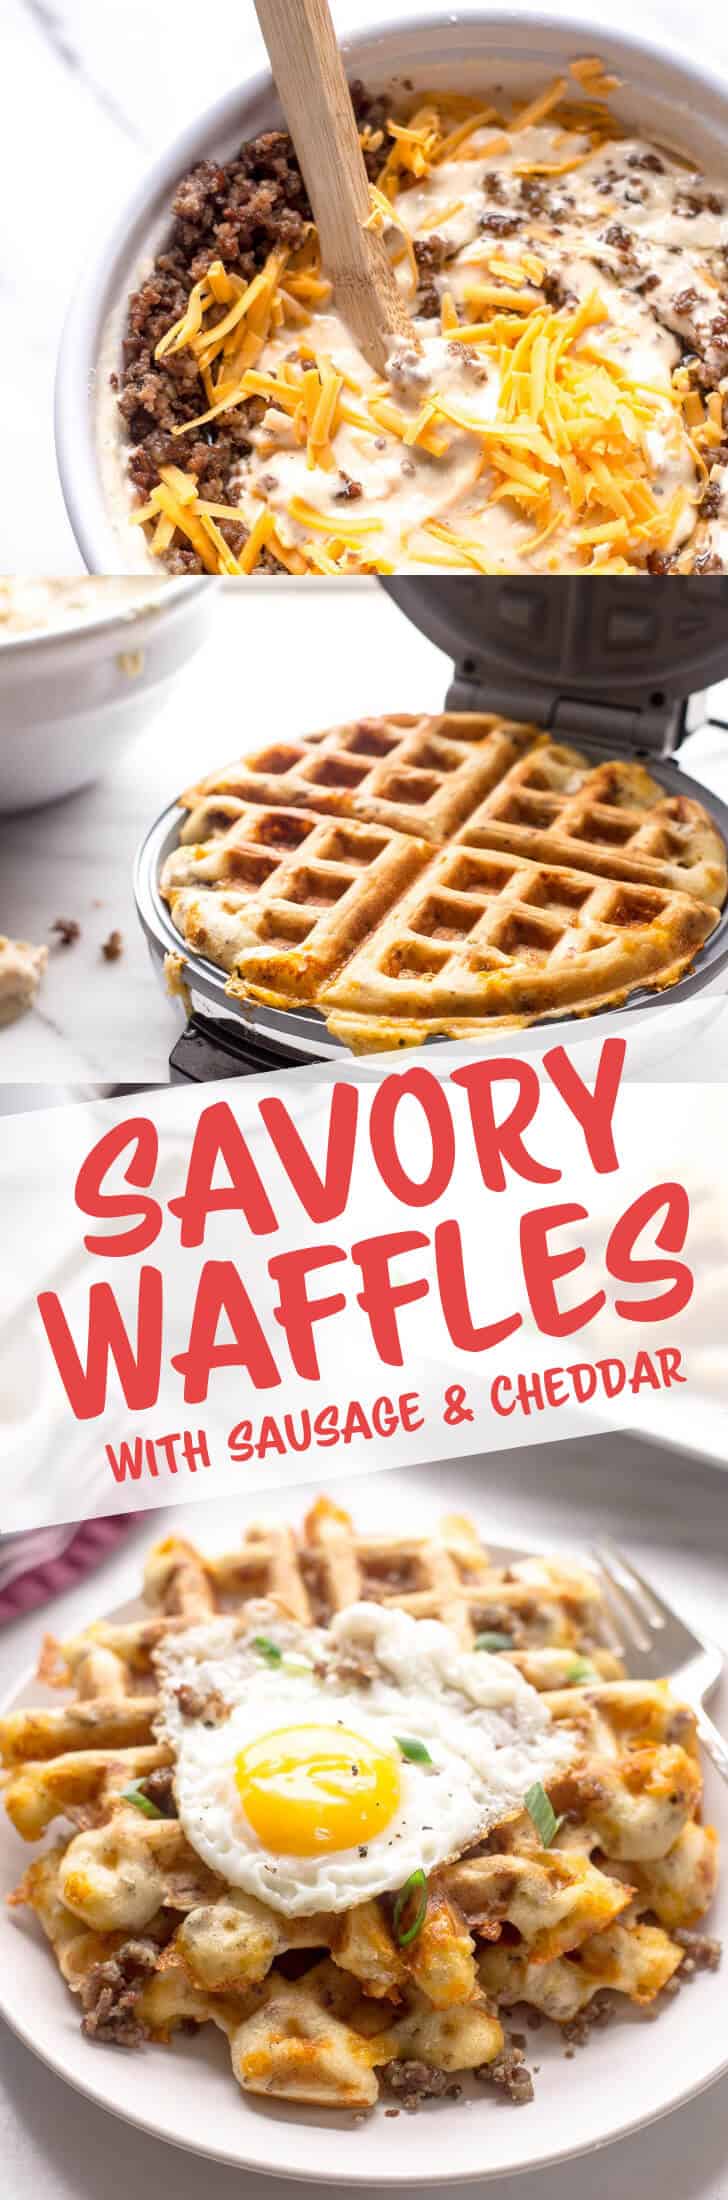 Savory Waffles with Sausage & Cheddar - Give your weekend waffles a make-over by adding savory sausage and cheddar cheese. Drizzled with maple syrup or topped with a fried egg, these waffles are sure to be a new favorite!